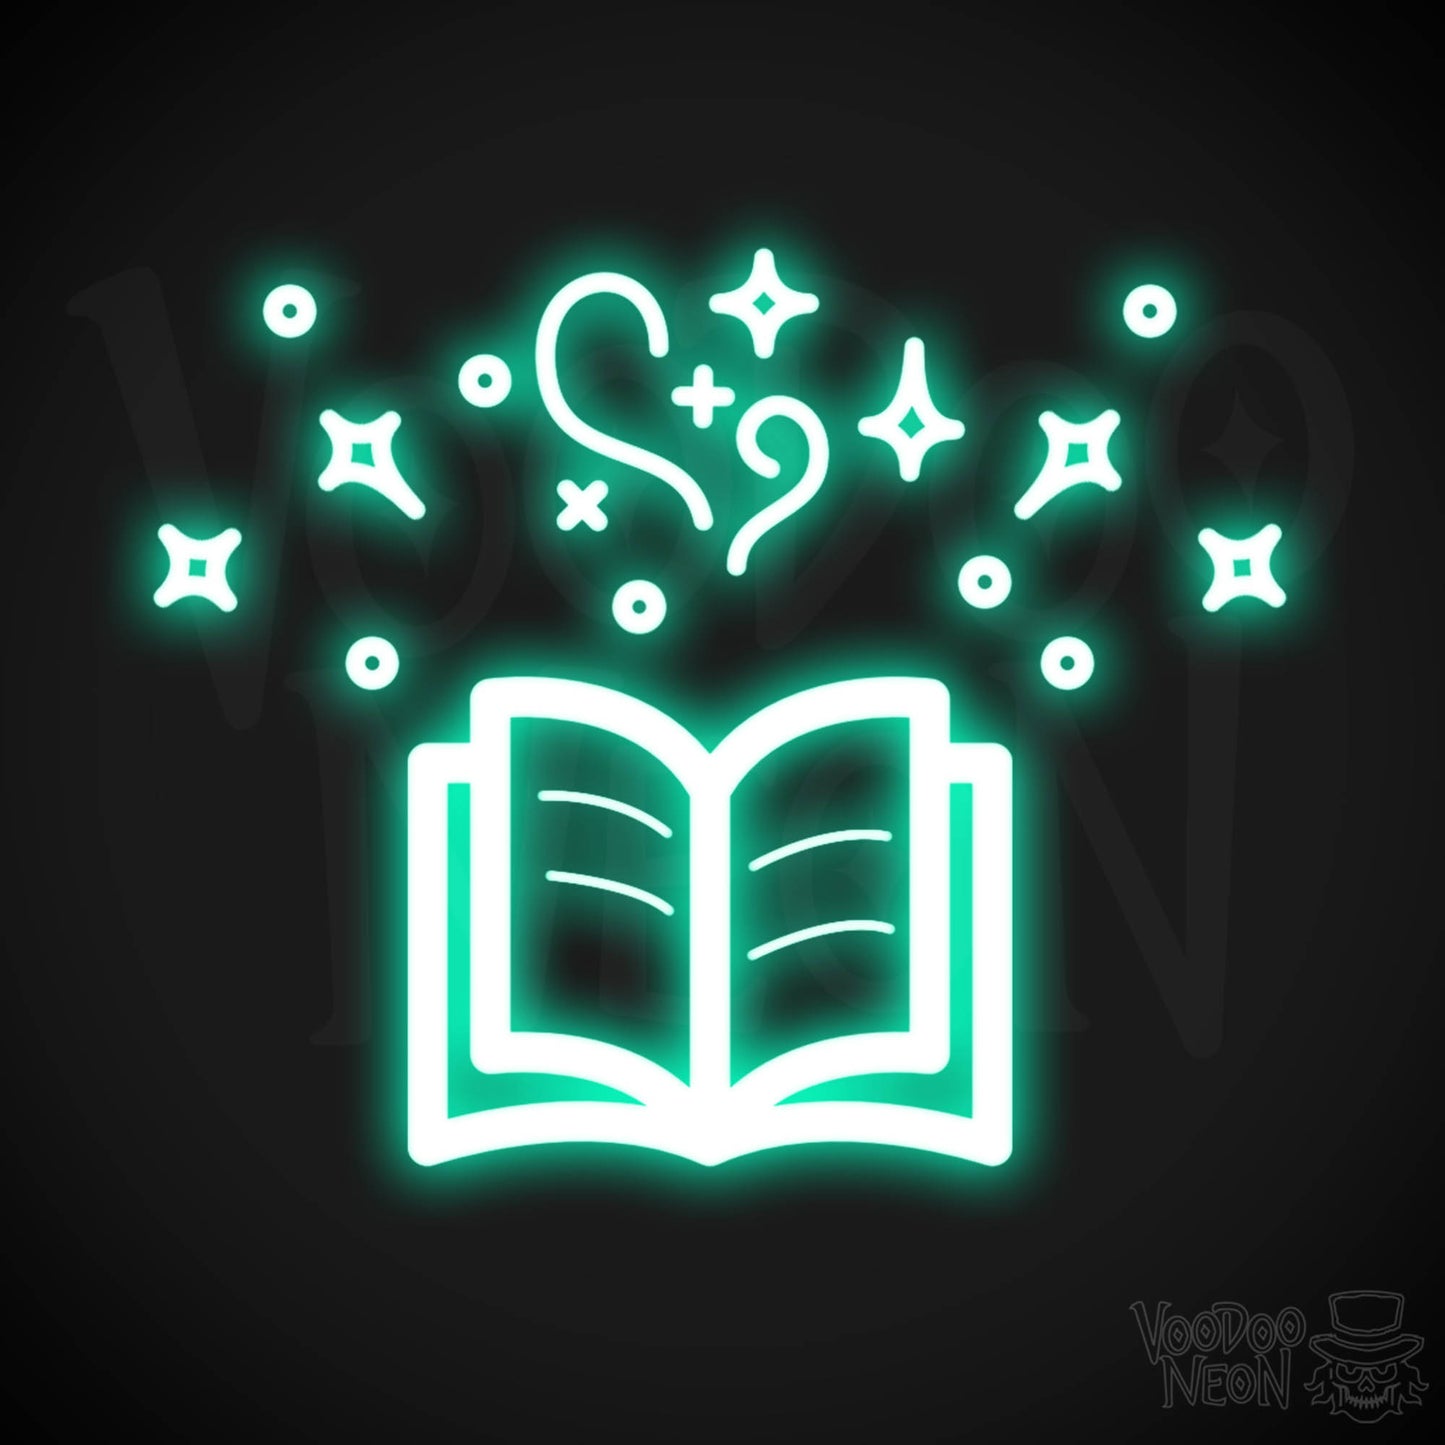 Neon Spell Book - Spell Book Neon Sign - LED Neon Wall Art - Color Light Green